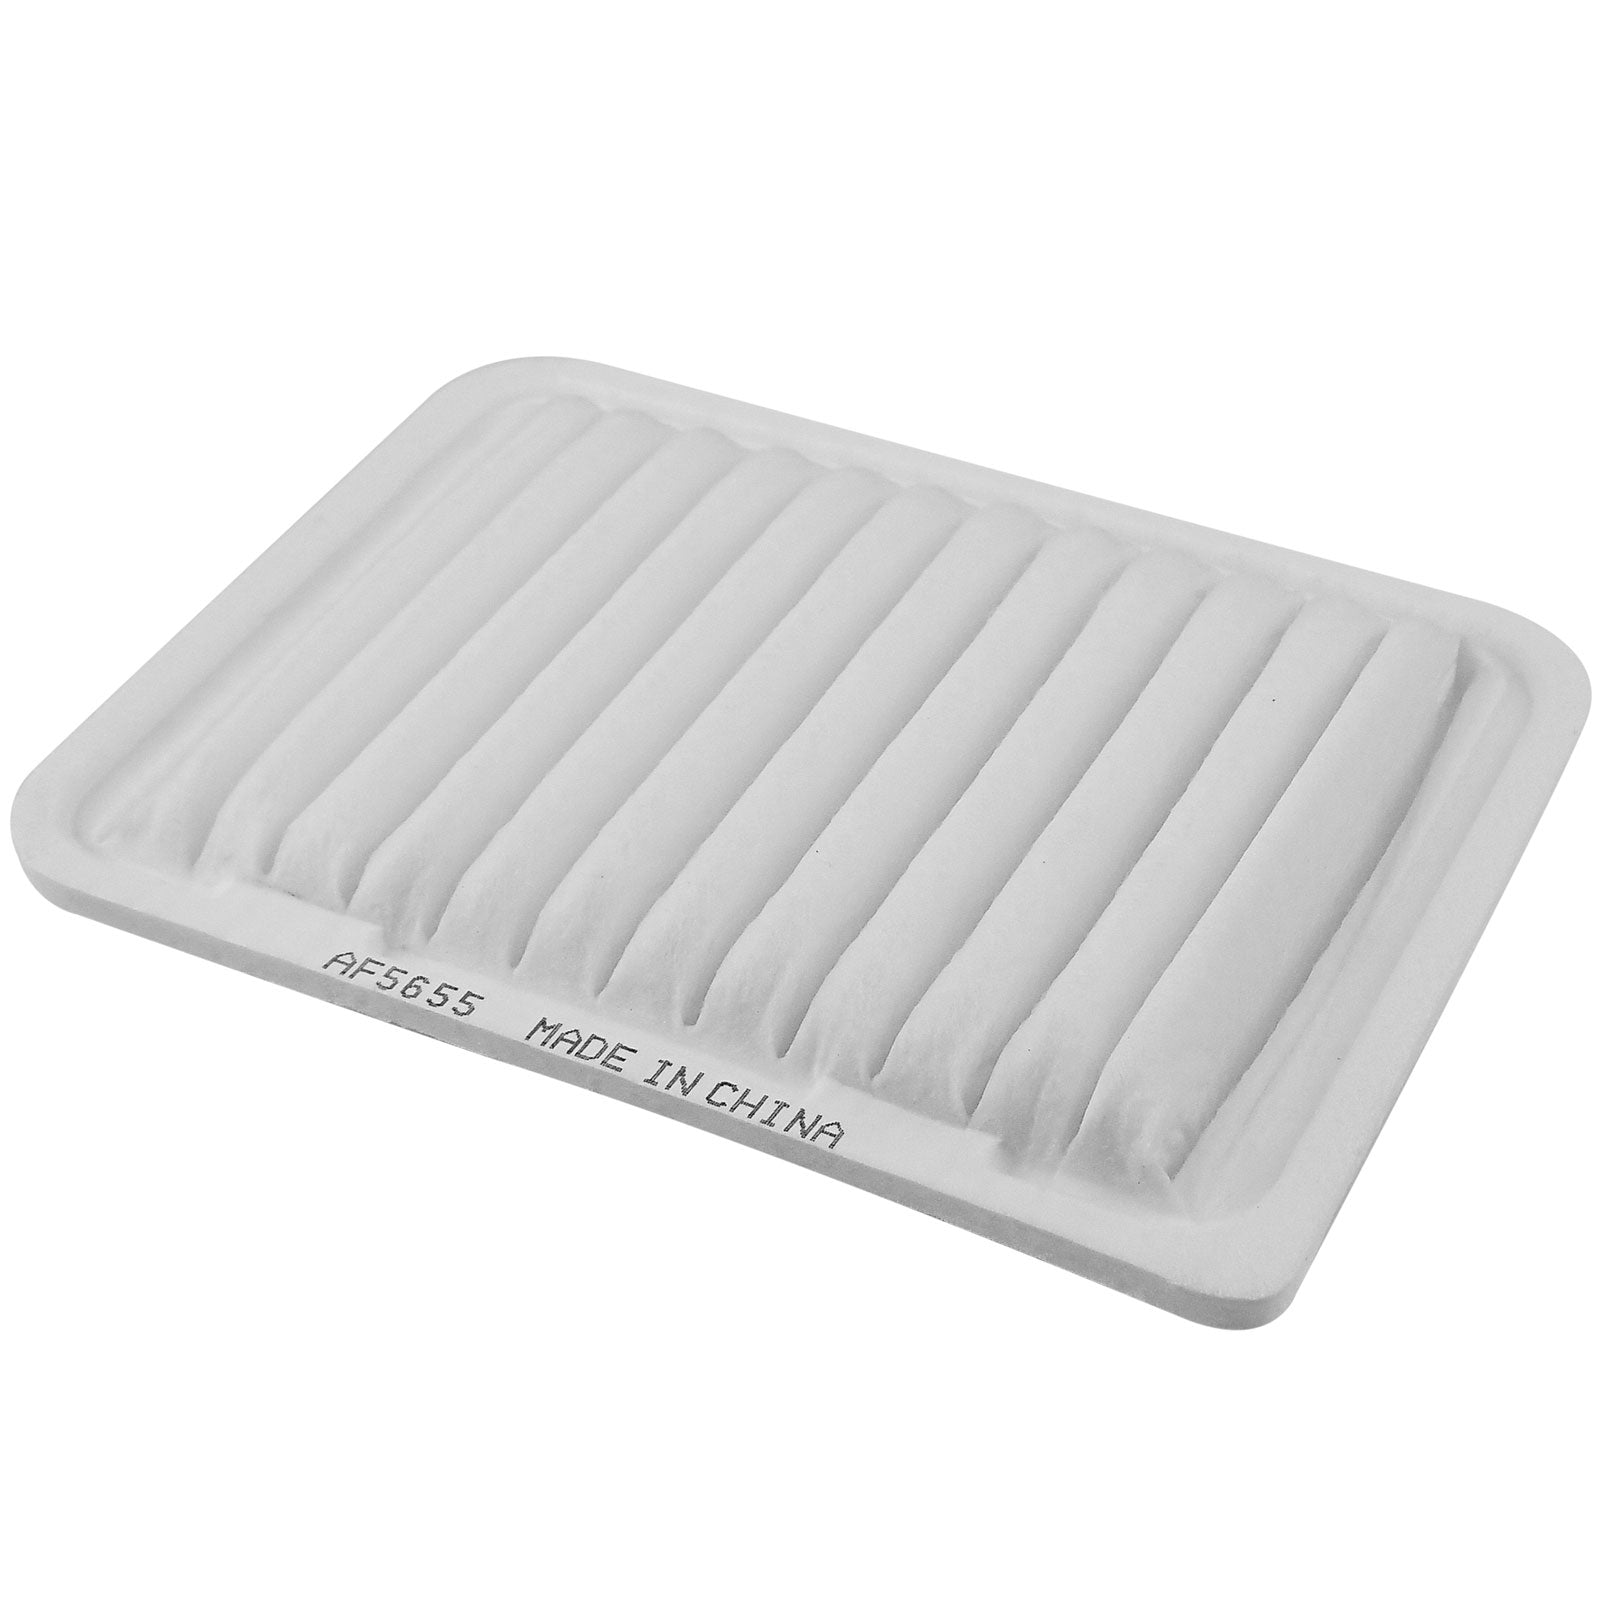 MotorbyMotor CAF5655 Cabin Air Filter for Toyota Corolla Matrix (1.8L ONLY), Toyota Yaris; Scion XD (All Models), Pontiac Vibe (1.8L) Premium Air Filter MotorbyMotor